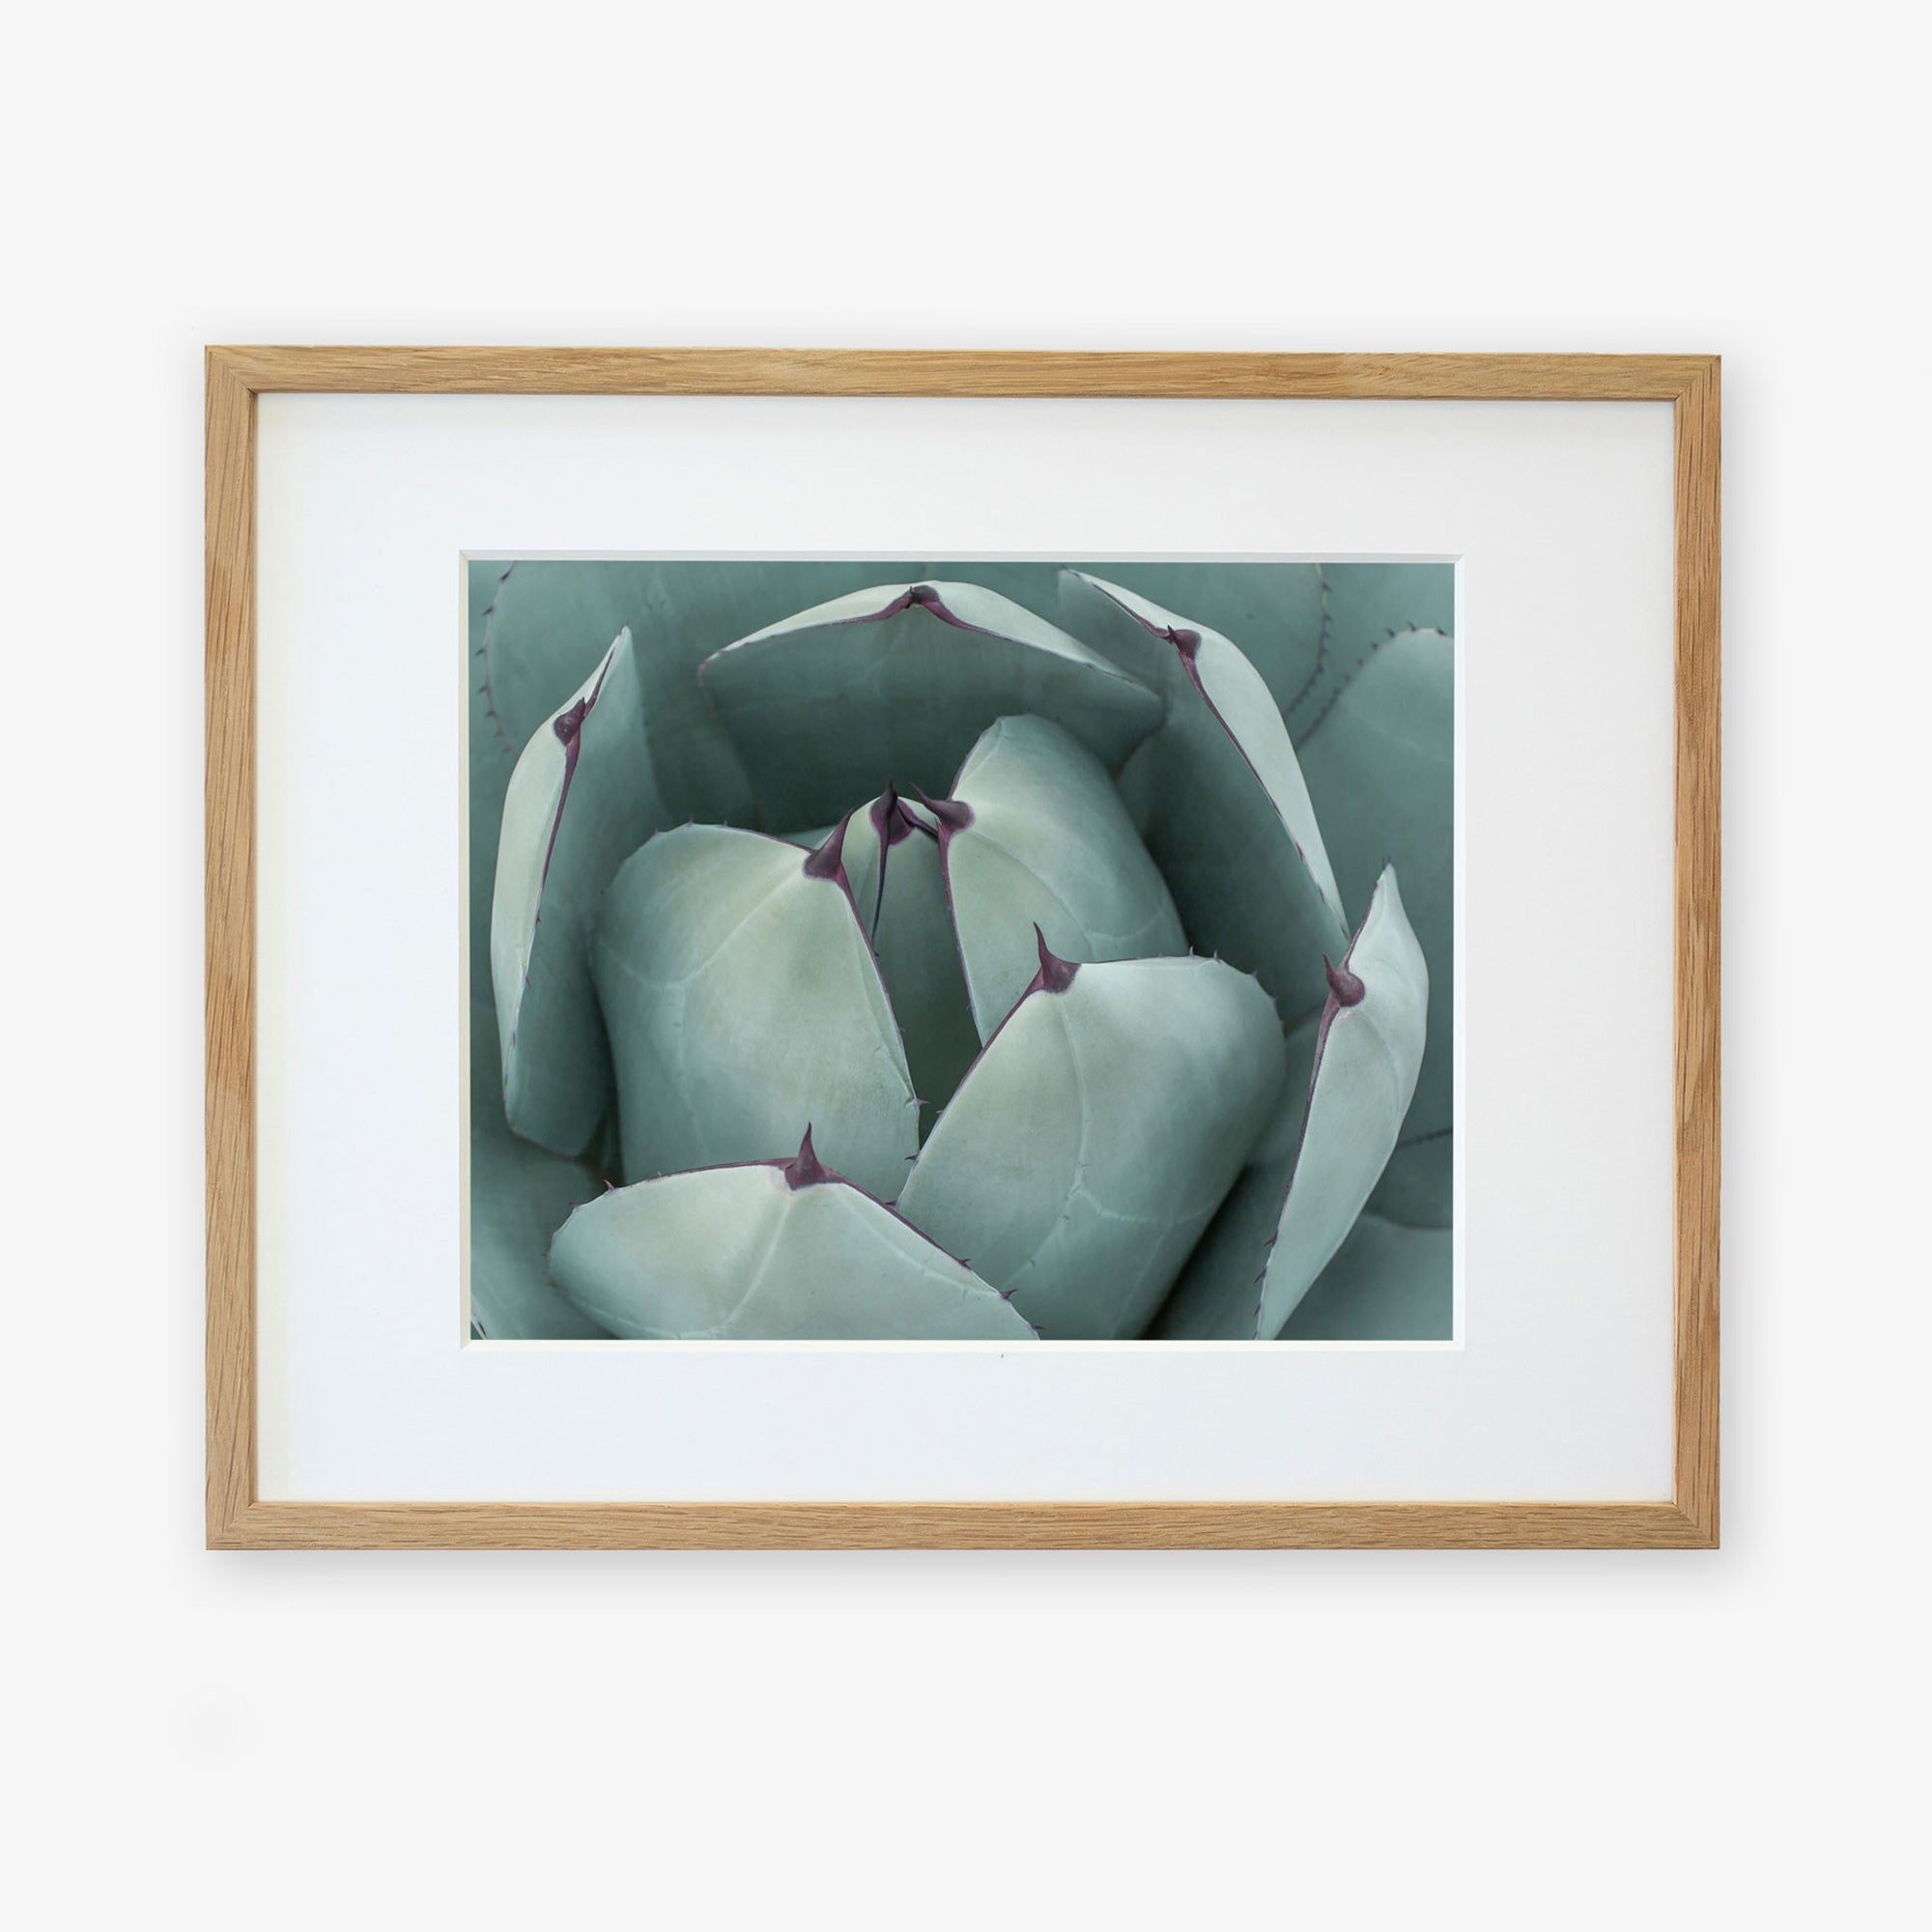 A framed photograph of an Abstract Teal Green Botanical Print, 'Teal Petals' by Offley Green, printed on archival photographic paper and displayed against a soft, blurred background.